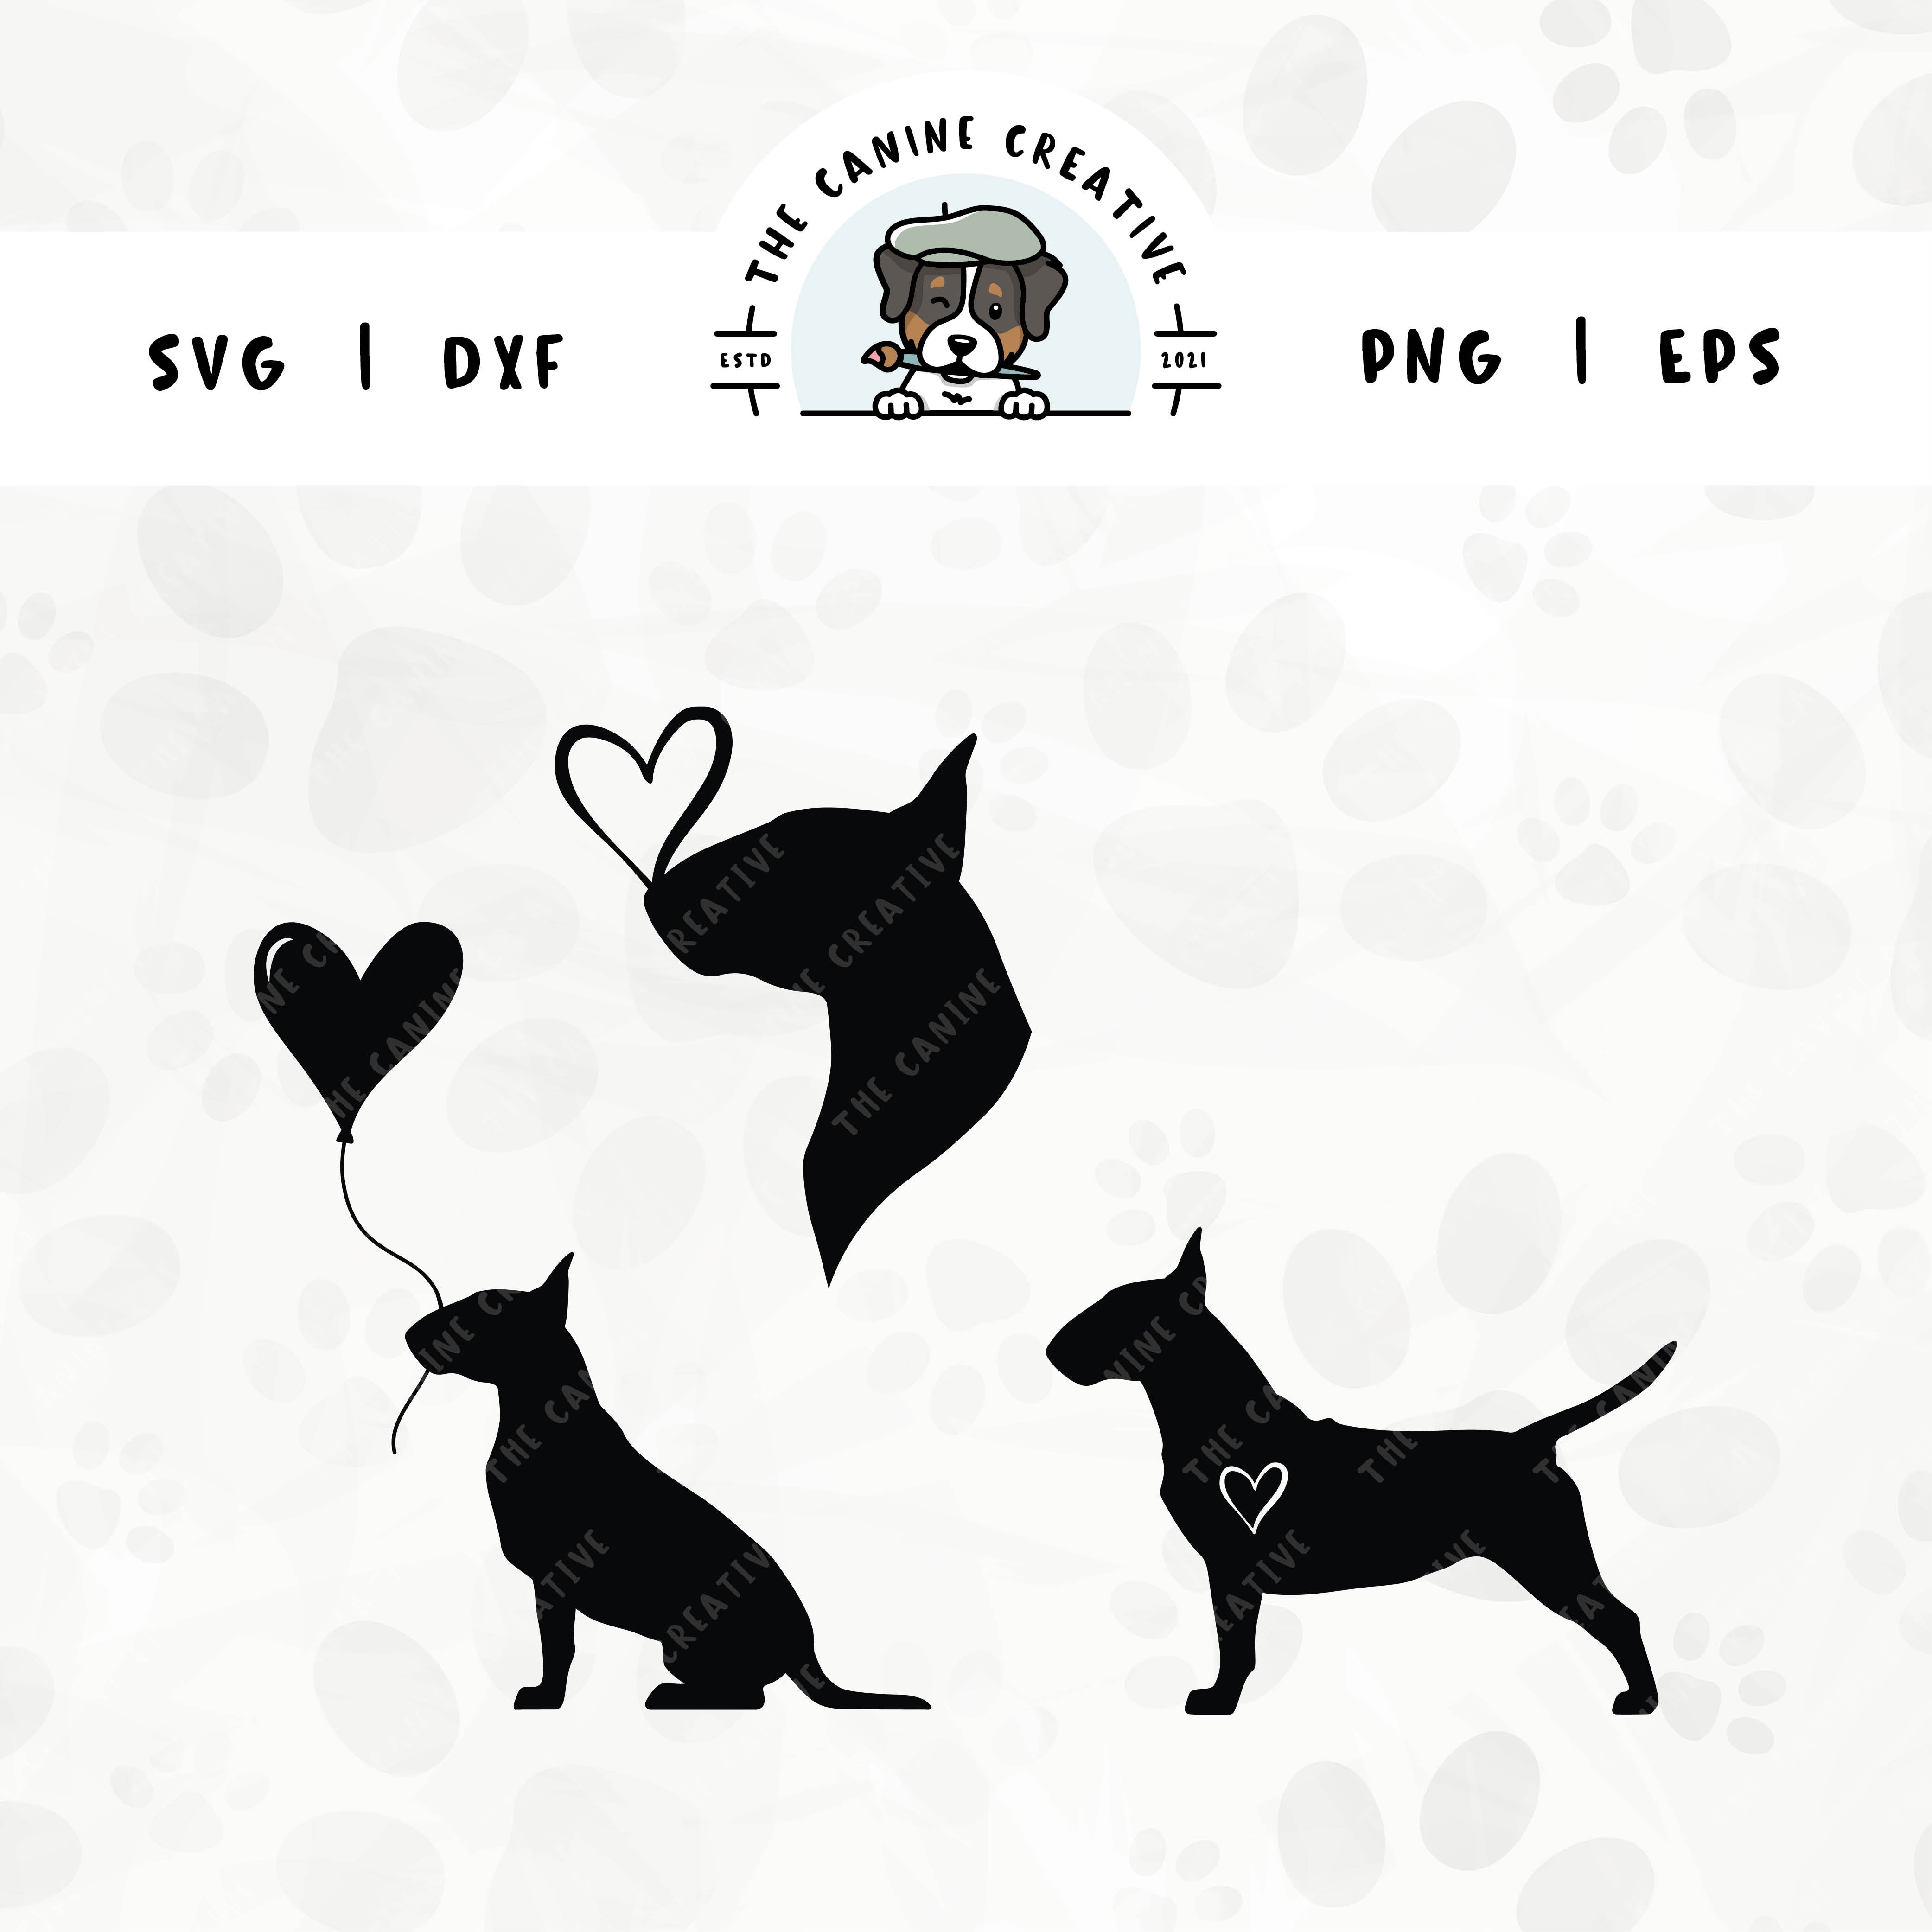 This 3-pack Bull Terrier silhouette bundle features a head portrait of a dog with a heart perched atop it’s nose, a sitting dog holding a heart balloon, and a standing profile of a dog with a heart inset. File formats include: SVG, DXF, PNG, and EPS.